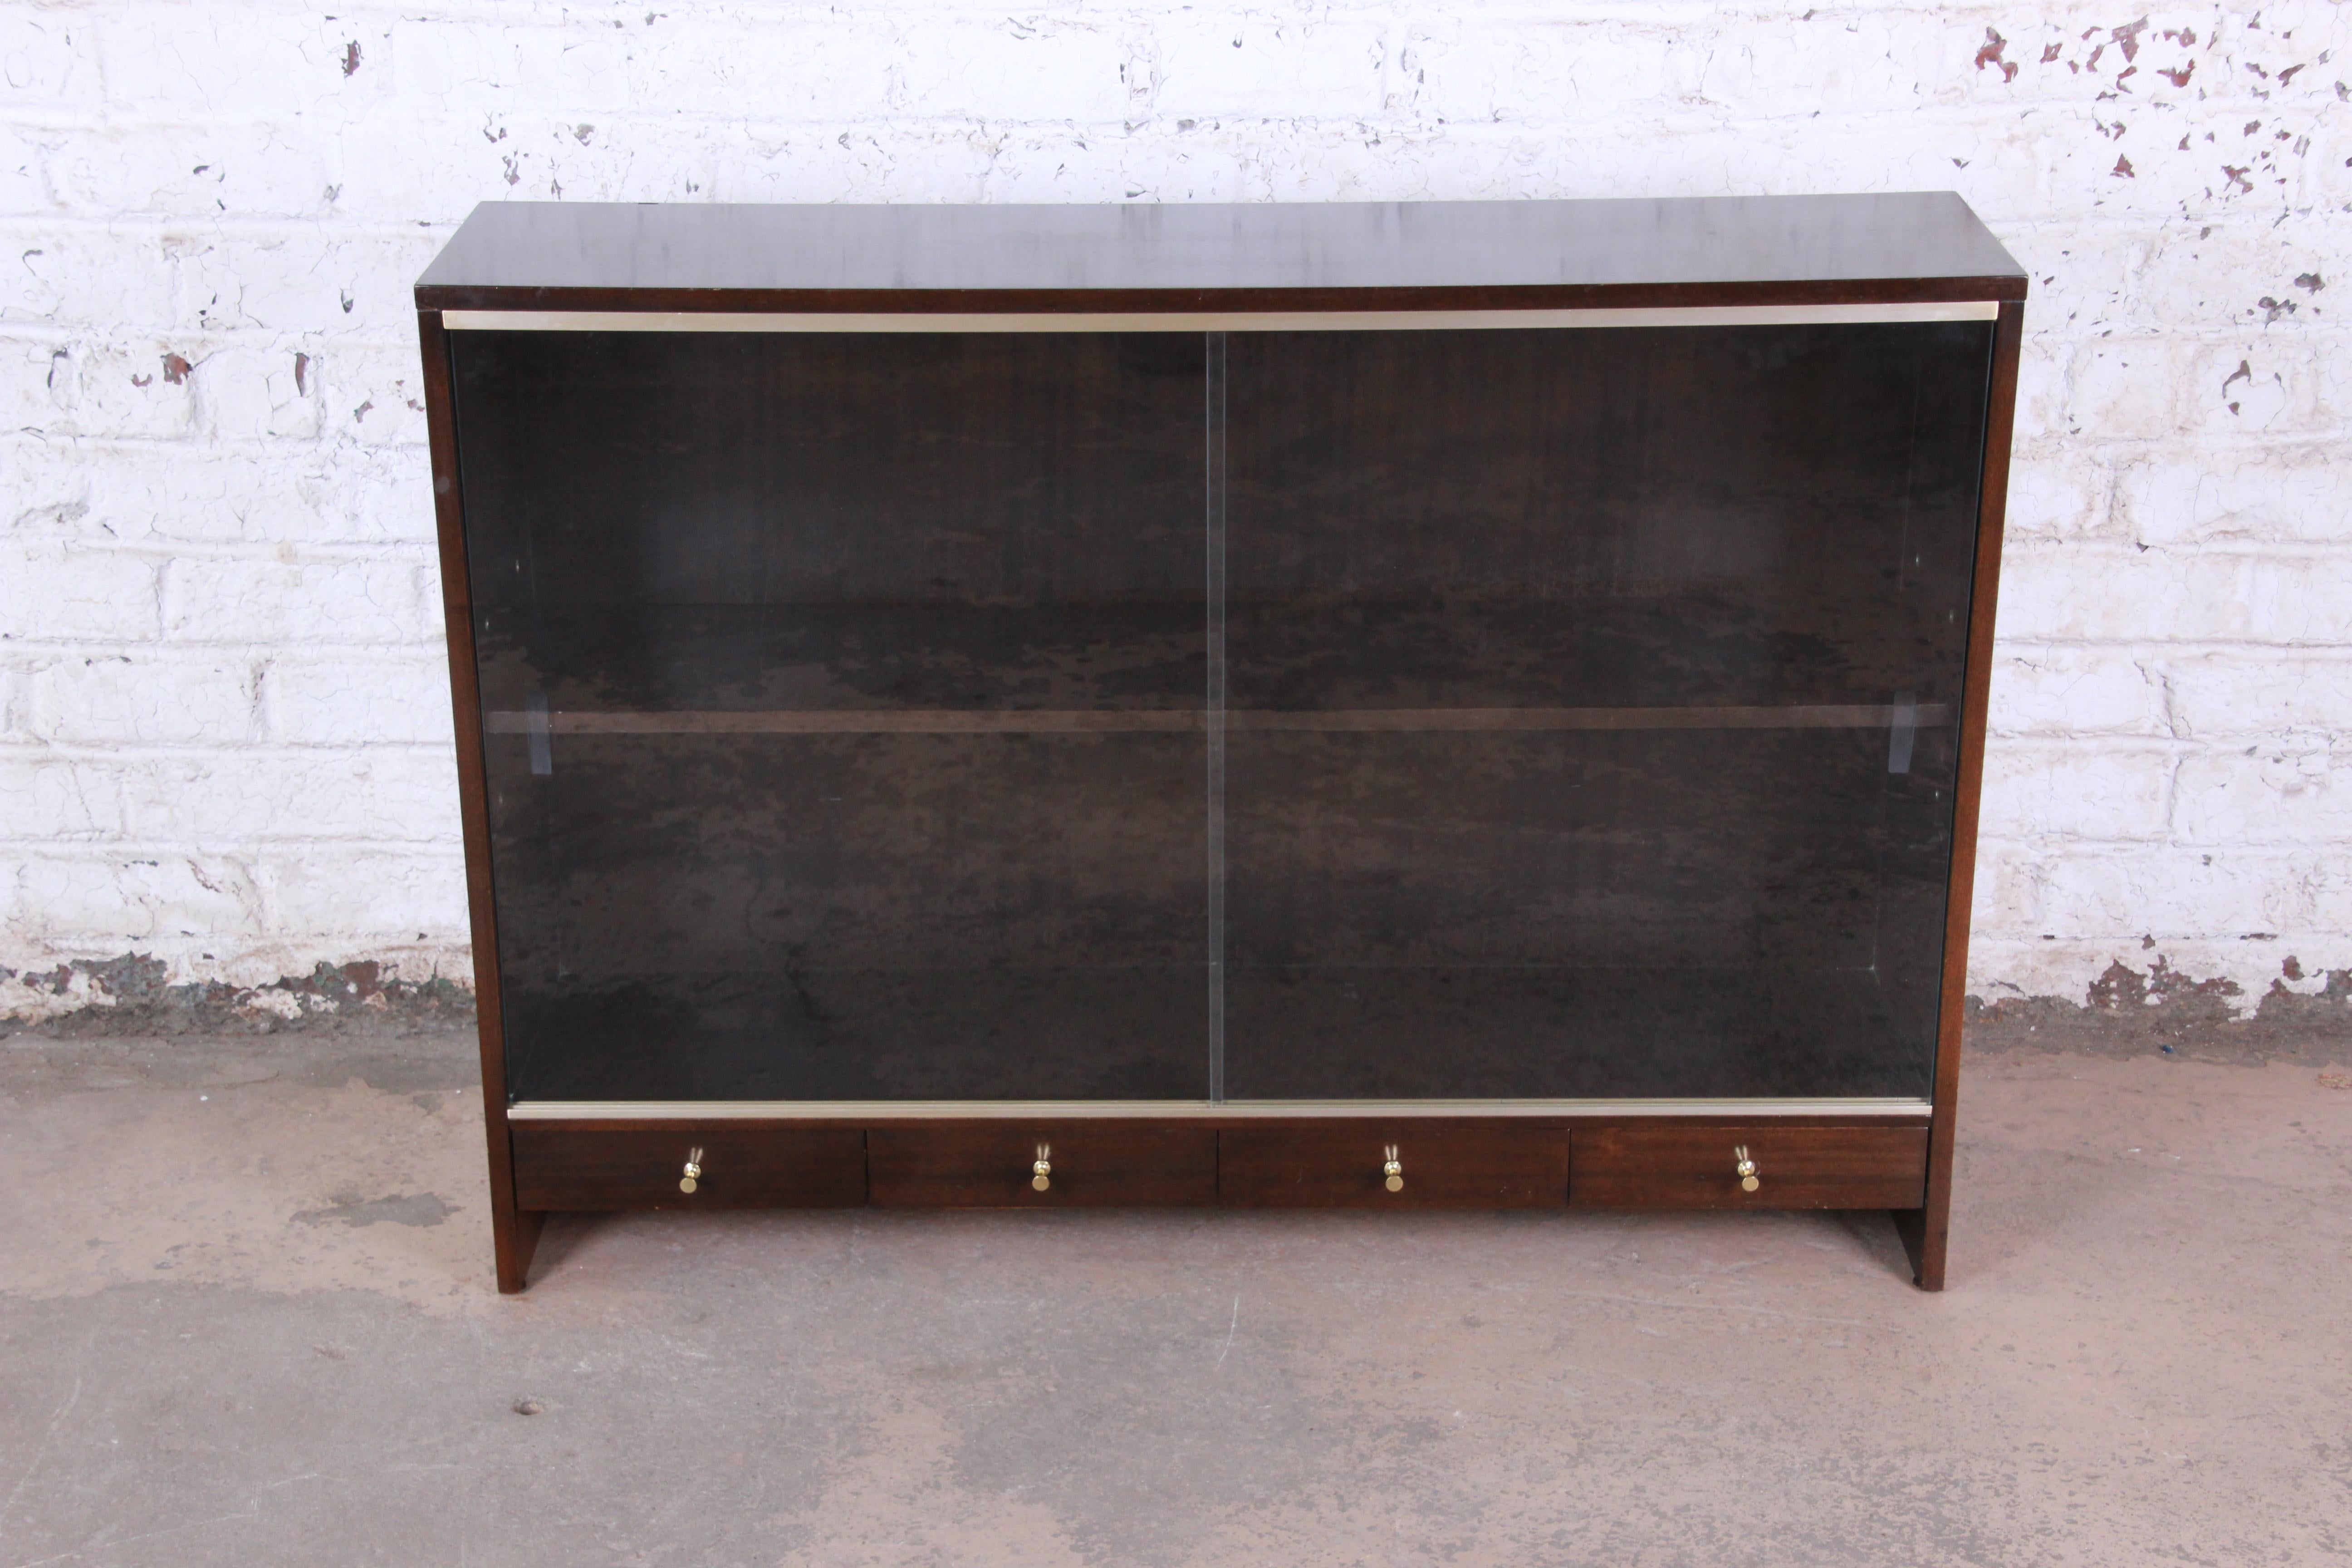 A sleek and stylish glass front bookcase or display cabinet designed by Paul McCobb for his 